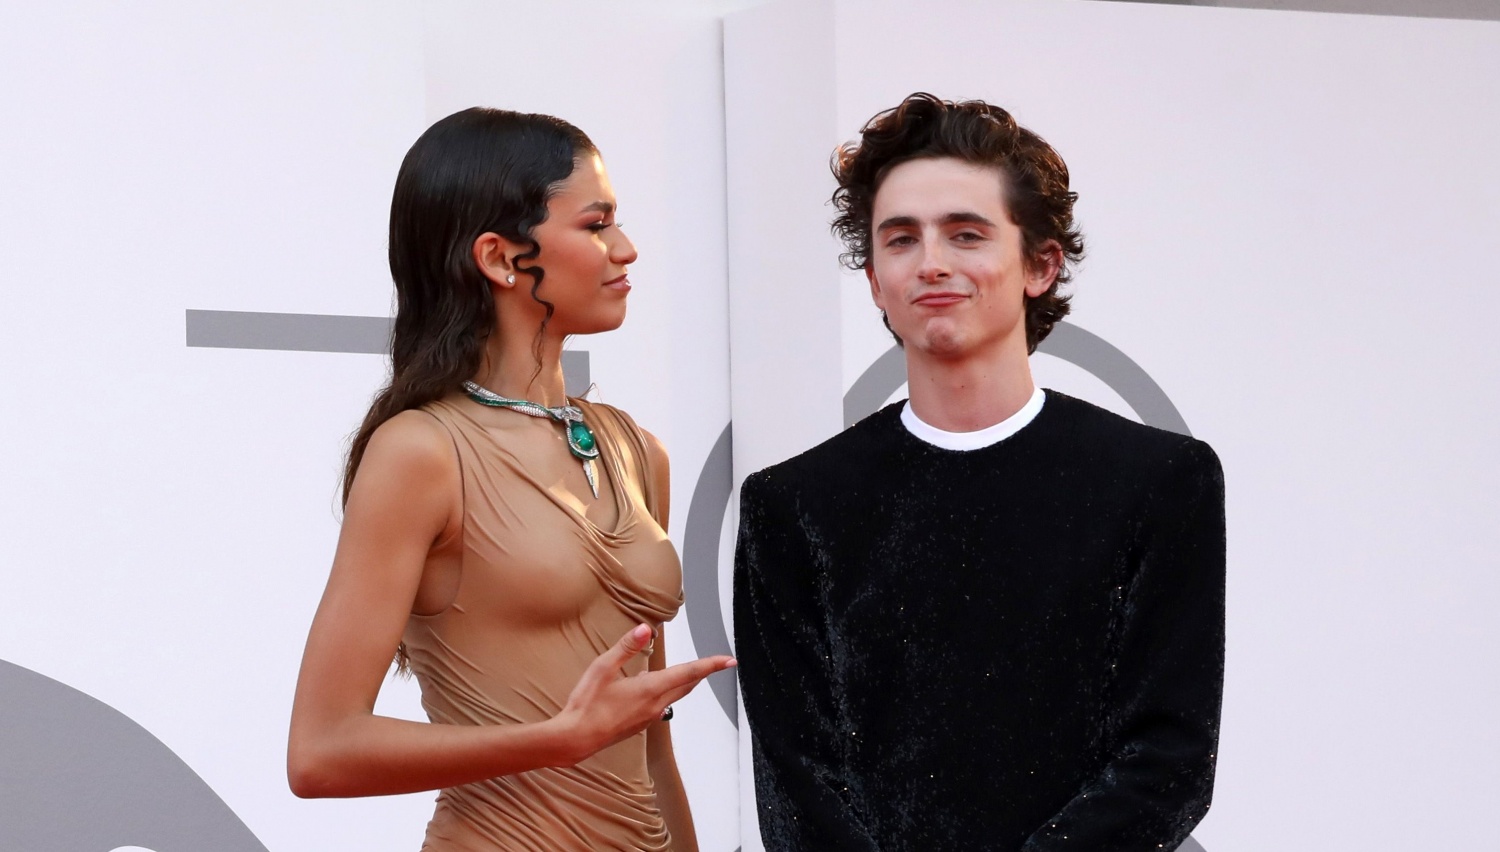 Zendaya and Timothée Chalamet attend the red carpet of the movie "Dune" during the 78th Venice International Film Festival on September 03, 2021 in Venice, Italy. 